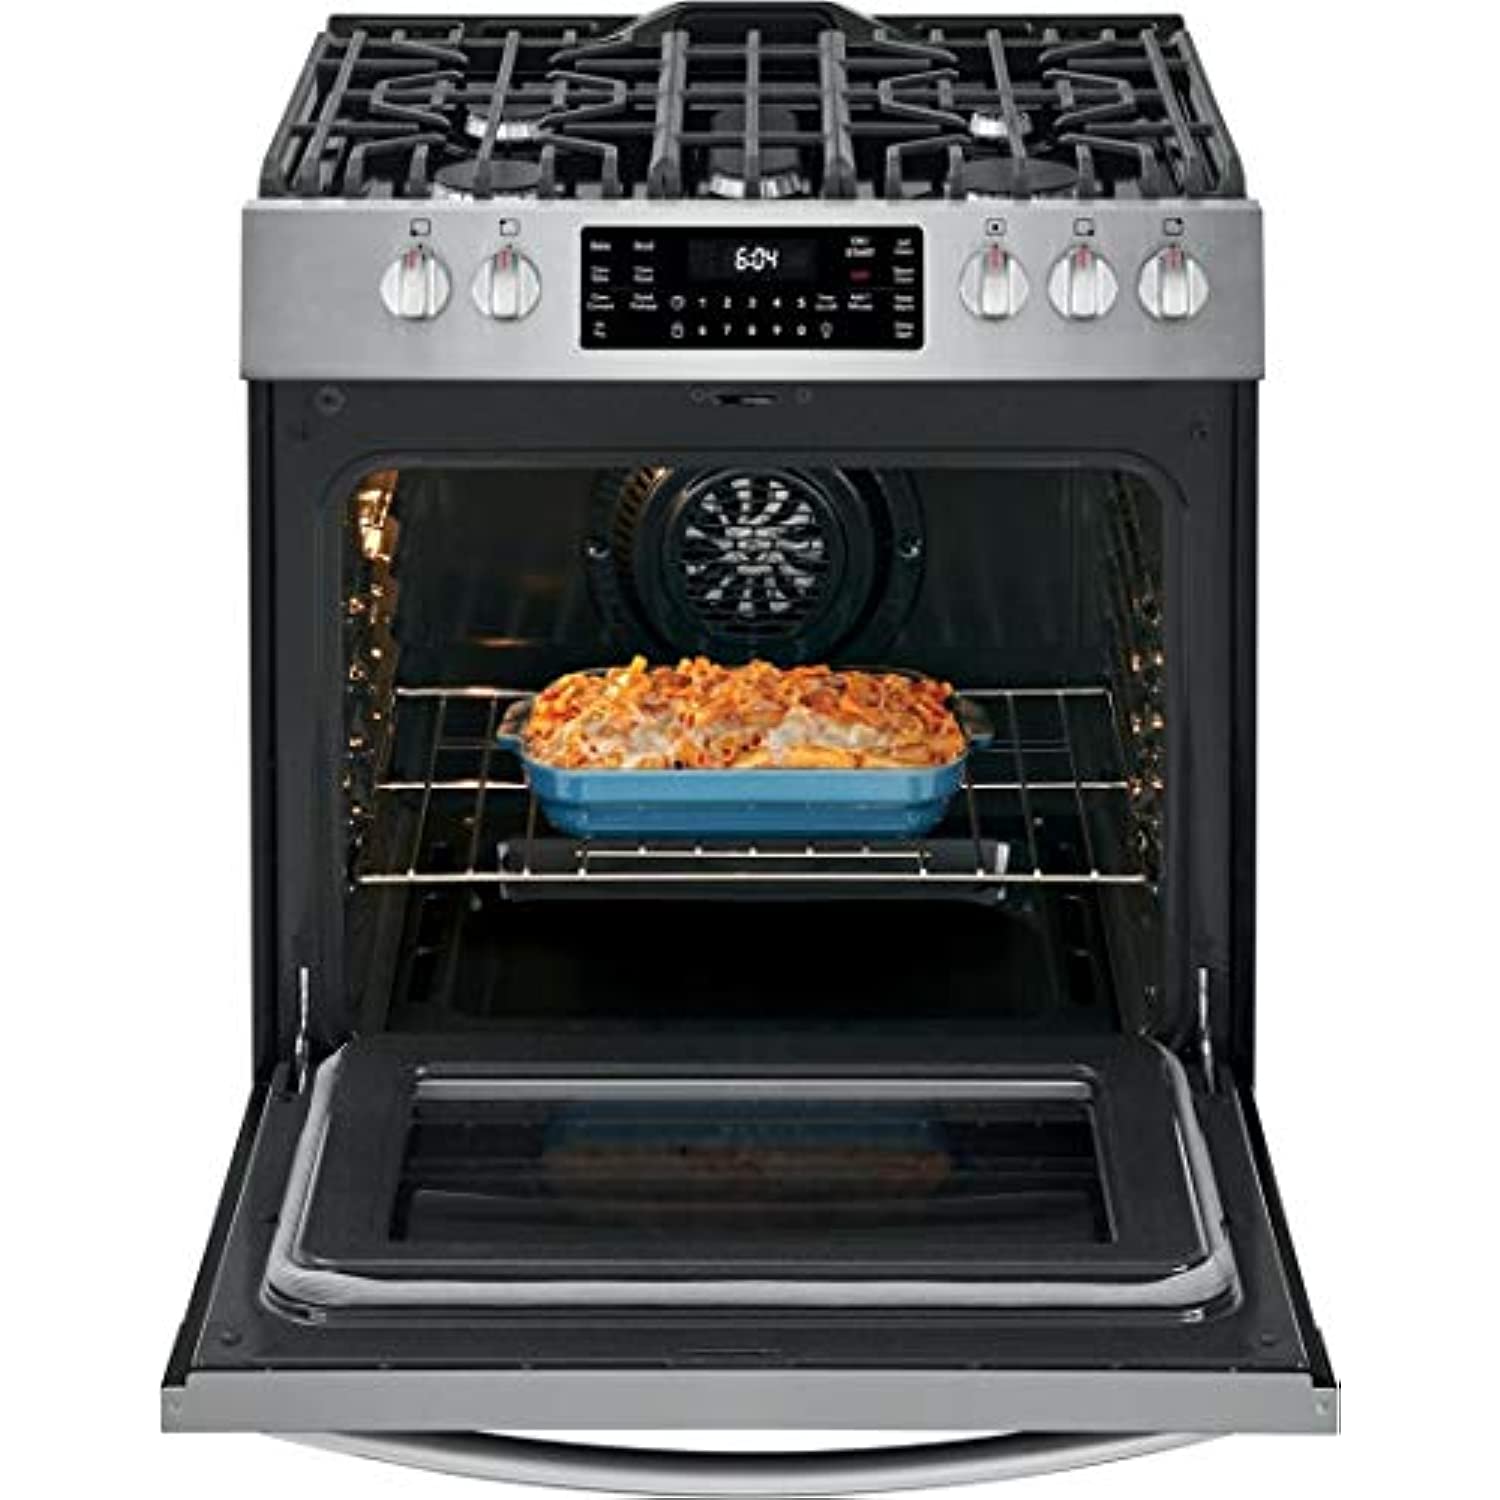 Frigidaire FGGH3047VF 30" Gallery Series Gas Range with 5 Sealed Burners, griddle, True Convection Oven, Self Cleaning, Air Fry Function, in Stainless Steel - image 3 of 10